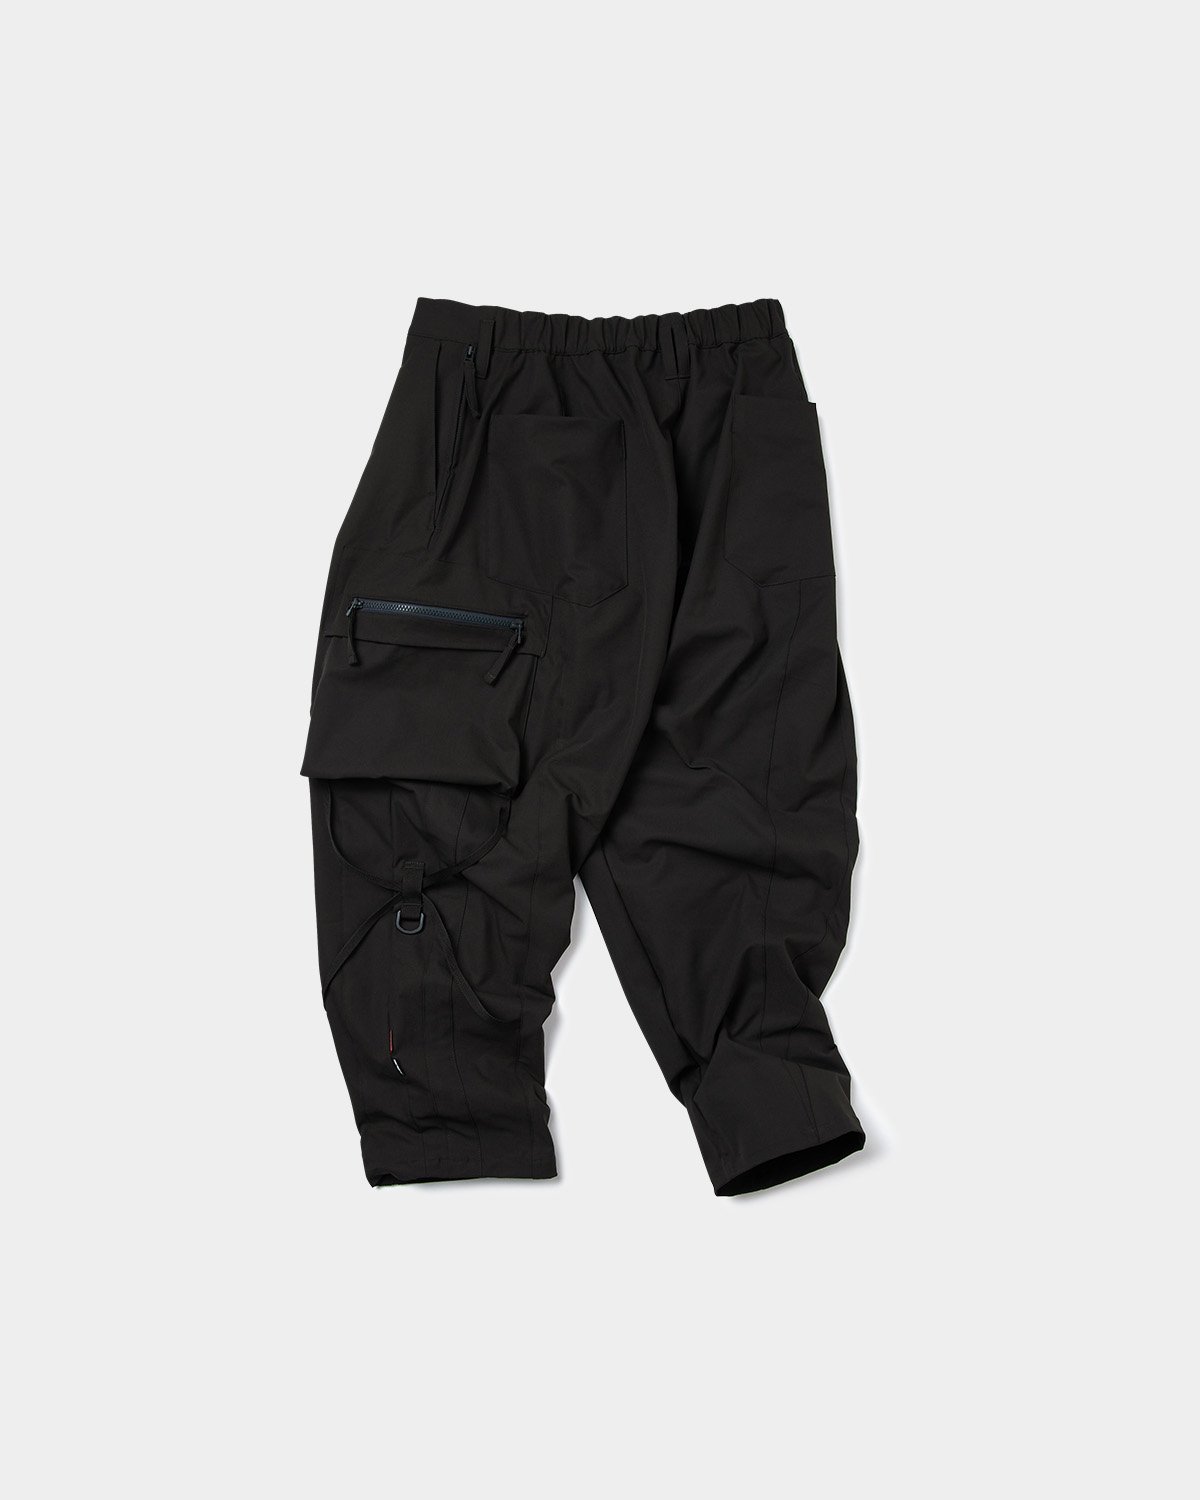 Diagram Utility Pants（GOOPiMADE x TIGHTBOOTH） - TIGHTBOOTH